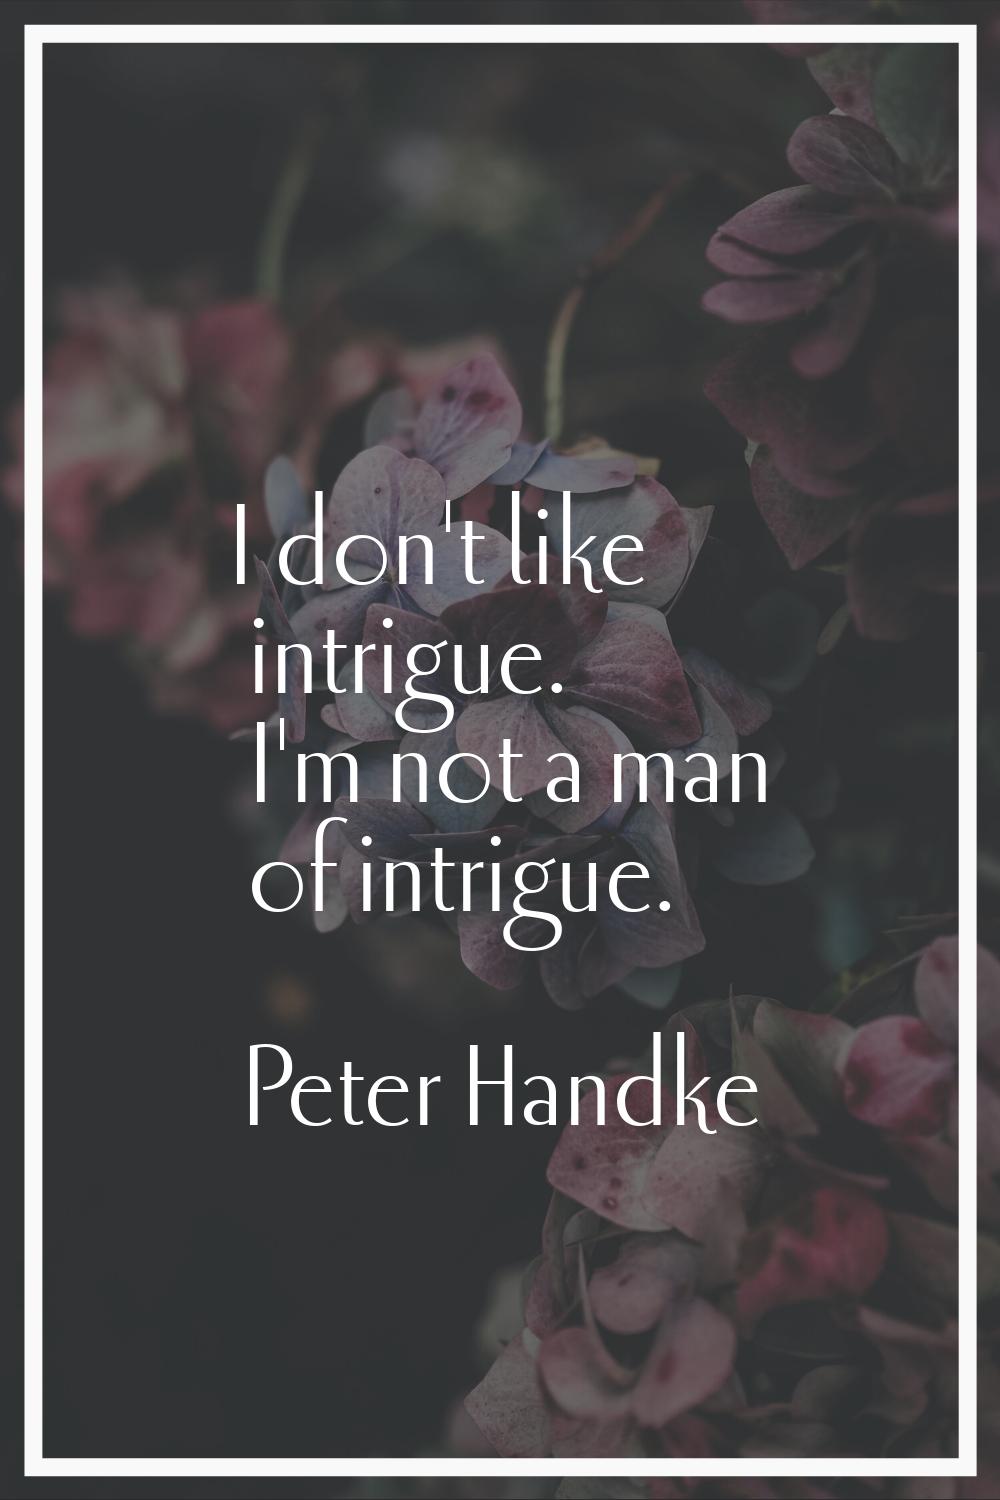 I don't like intrigue. I'm not a man of intrigue.